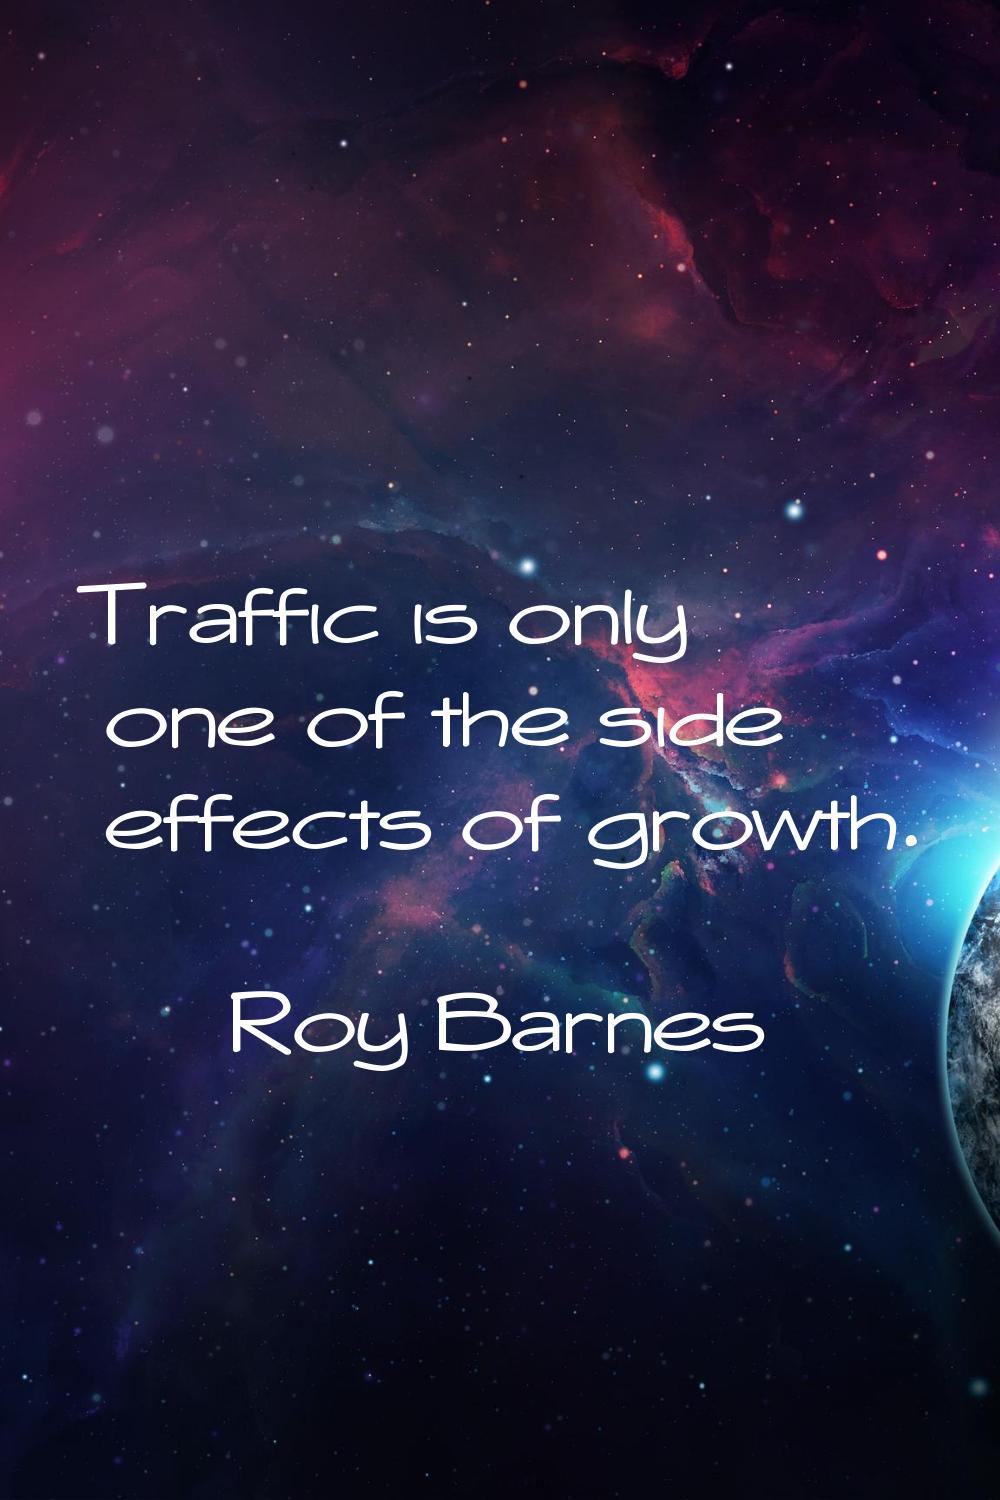 Traffic is only one of the side effects of growth.